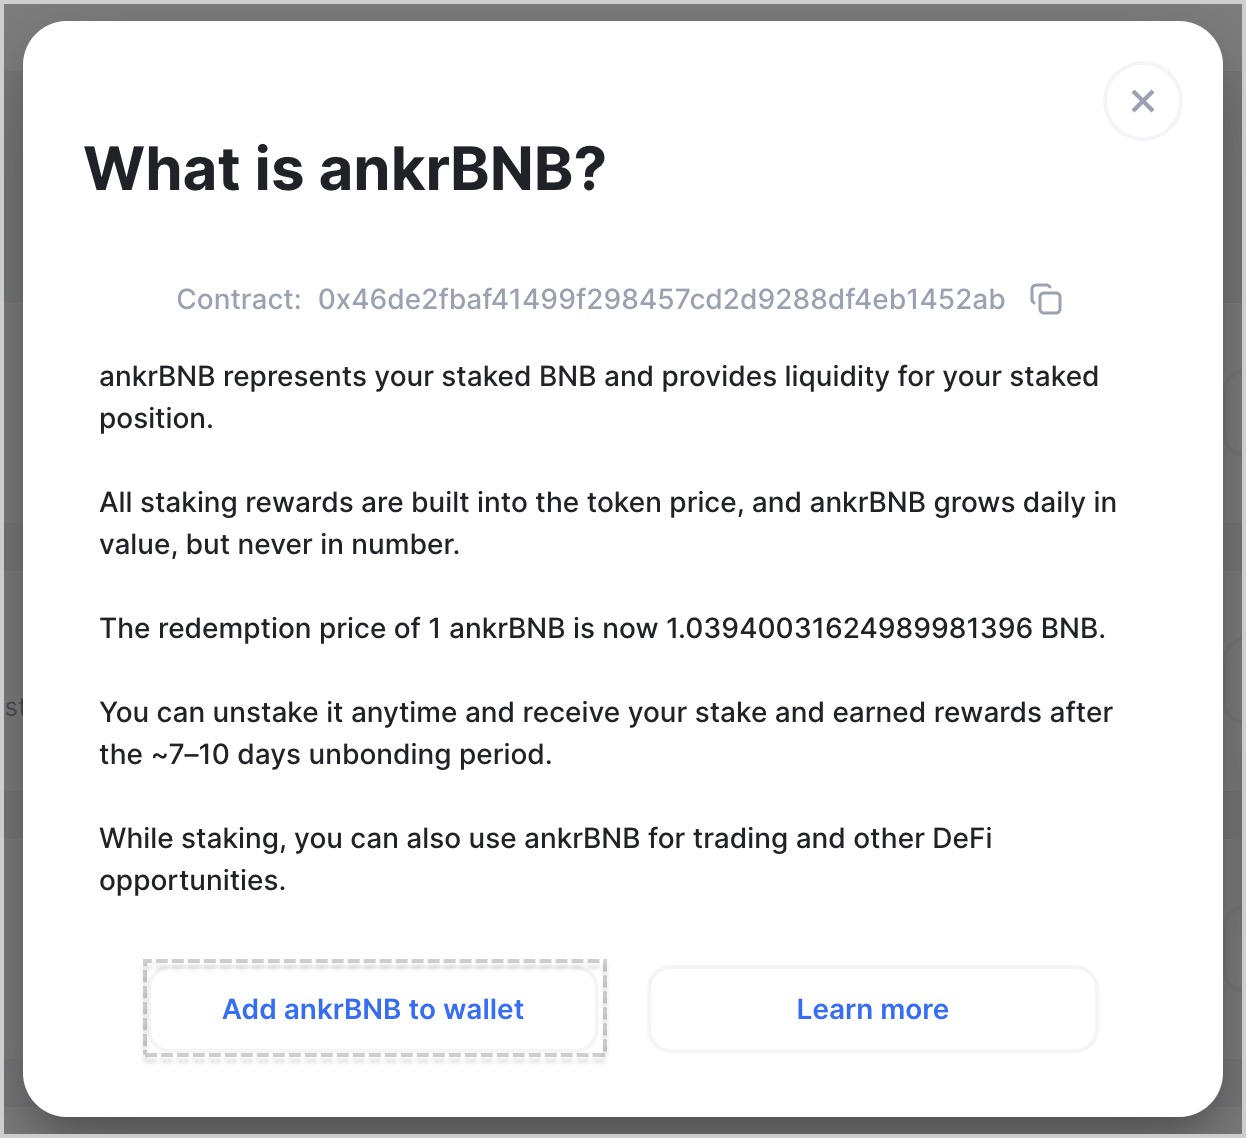 Click Add ankrBNB to wallet